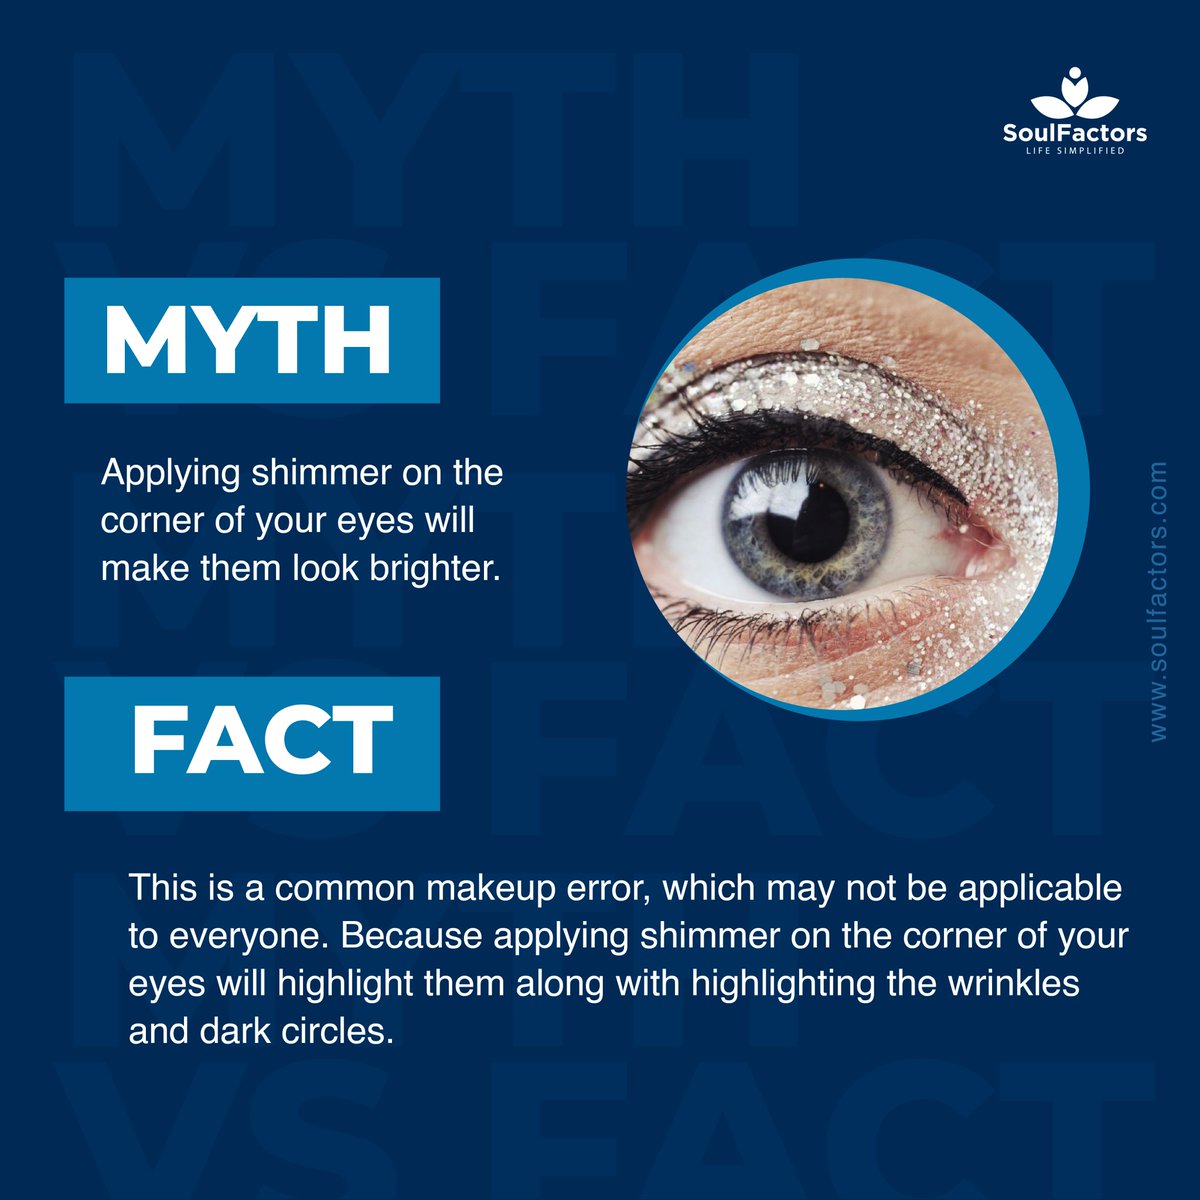 Let's burst some makeup myths!
.
.

#soulfactors #soulfactorslifesimplified #thecompletewomenblog #mythsvsfacts #myths #makeup #makeupmyth #makeupmyths #makeupmythbusters #makeupfacts #mythsandtruths #shimmer #shimmereyeshadow #howtouseskincareproducts #howtoapplymakeup